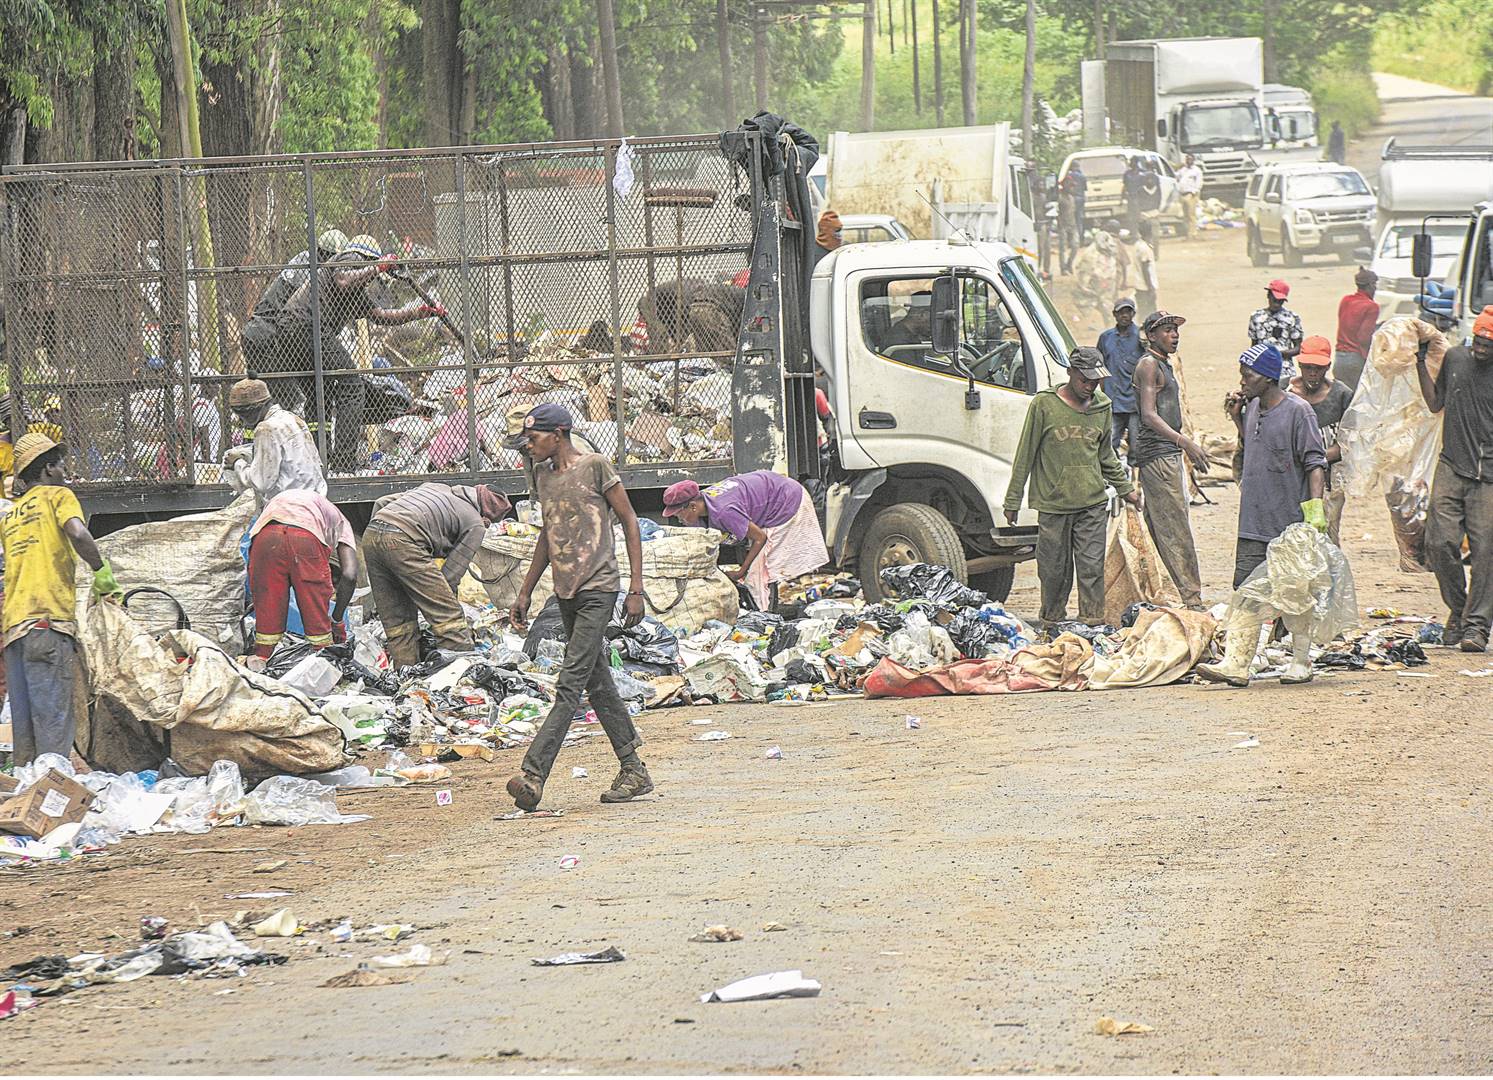 Waste-pickers scour through piles of rubbish dumped outside the New England Road landfill.